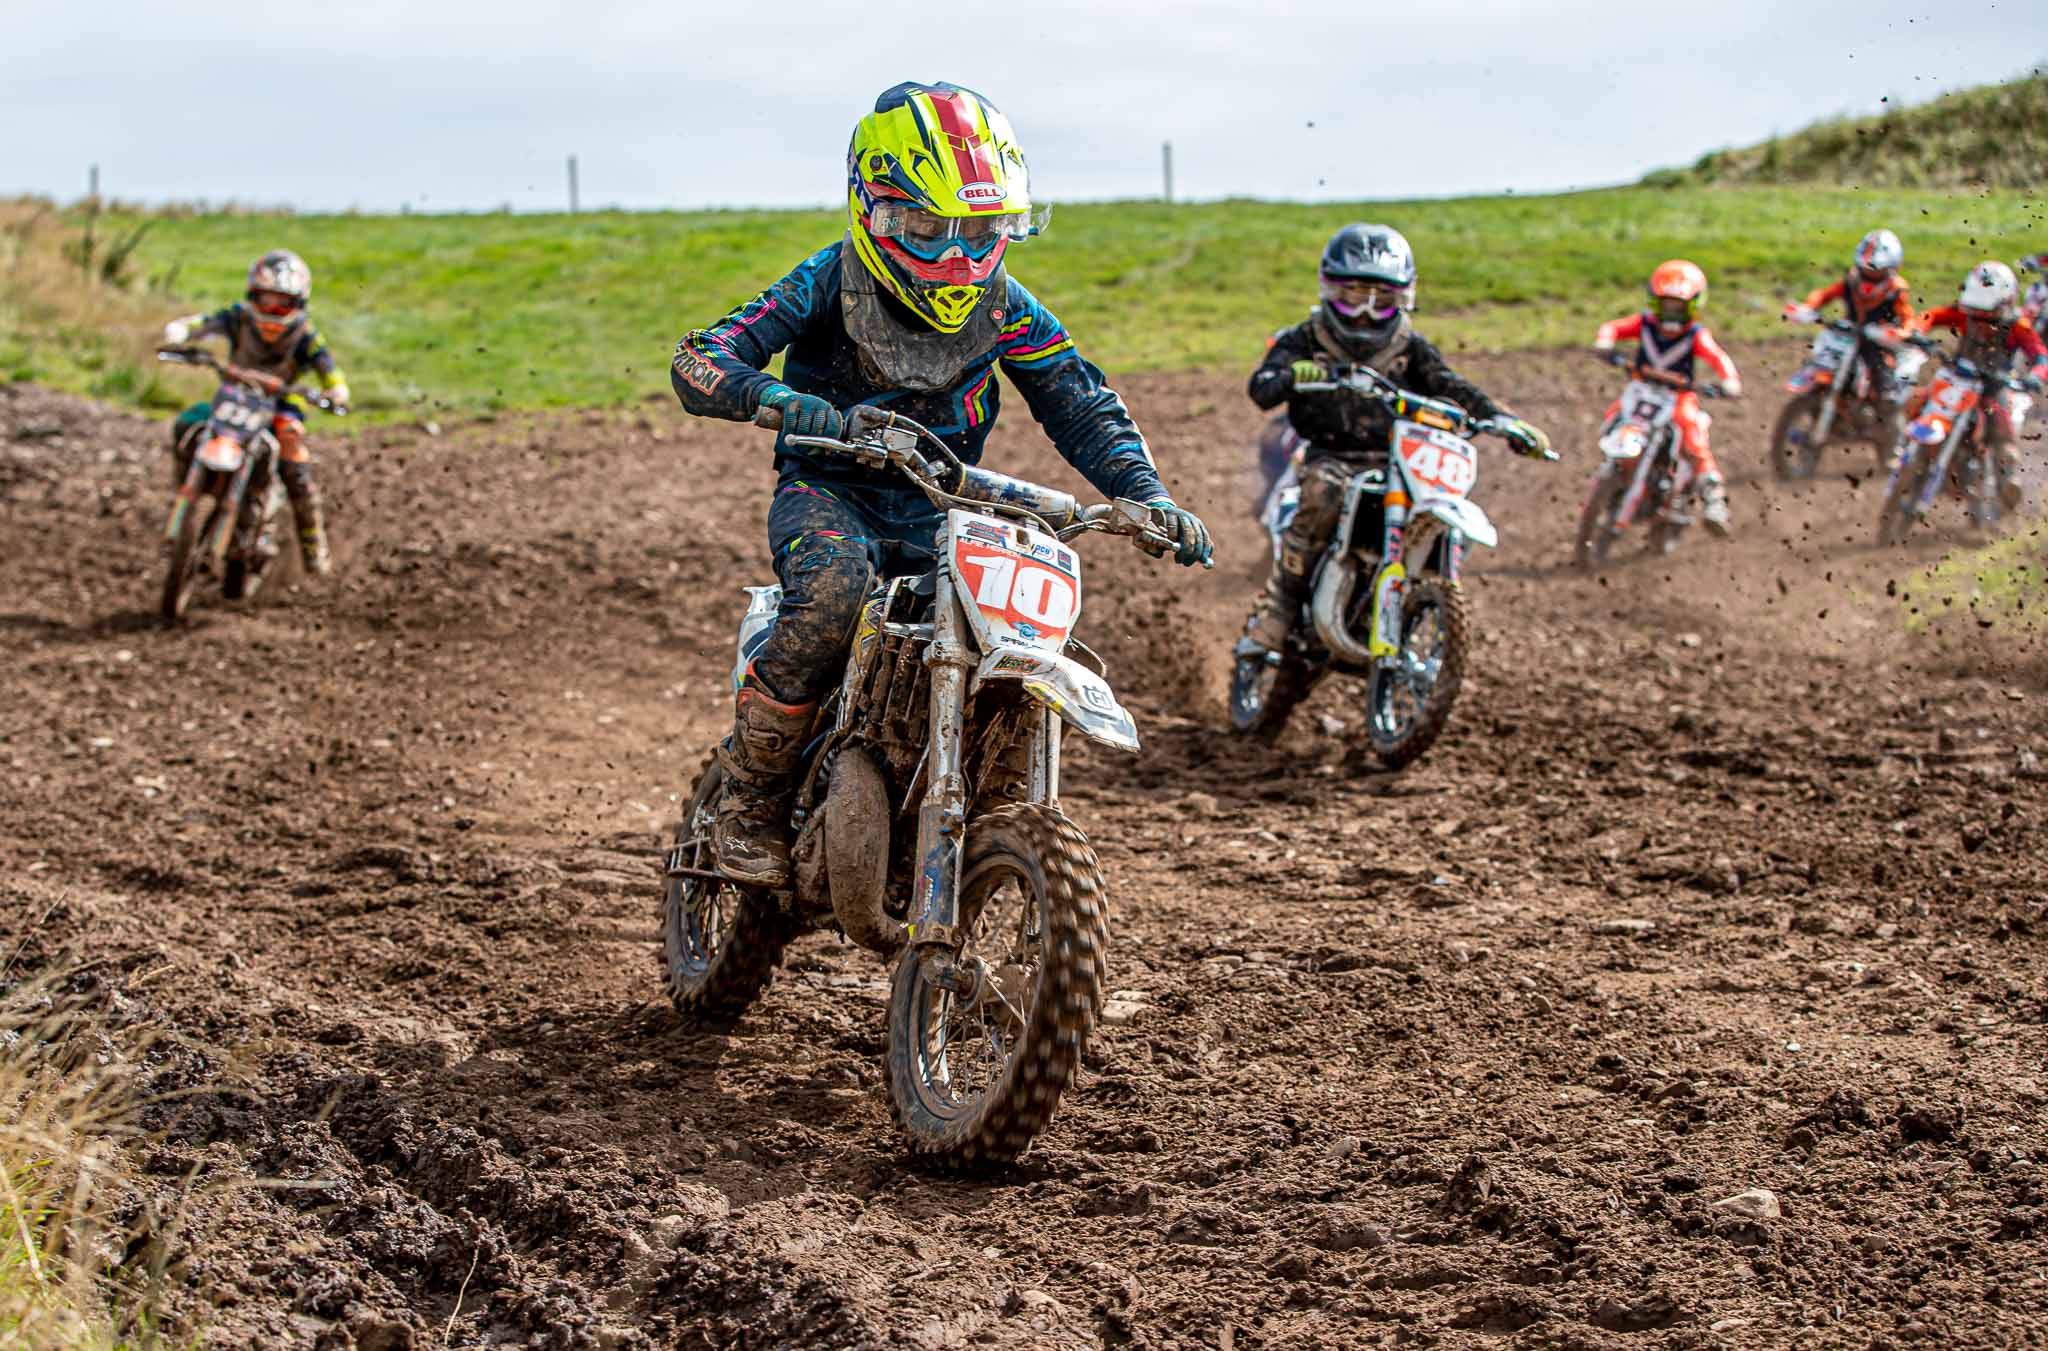 Gallery from the second round of the Scottish Motocross Championship